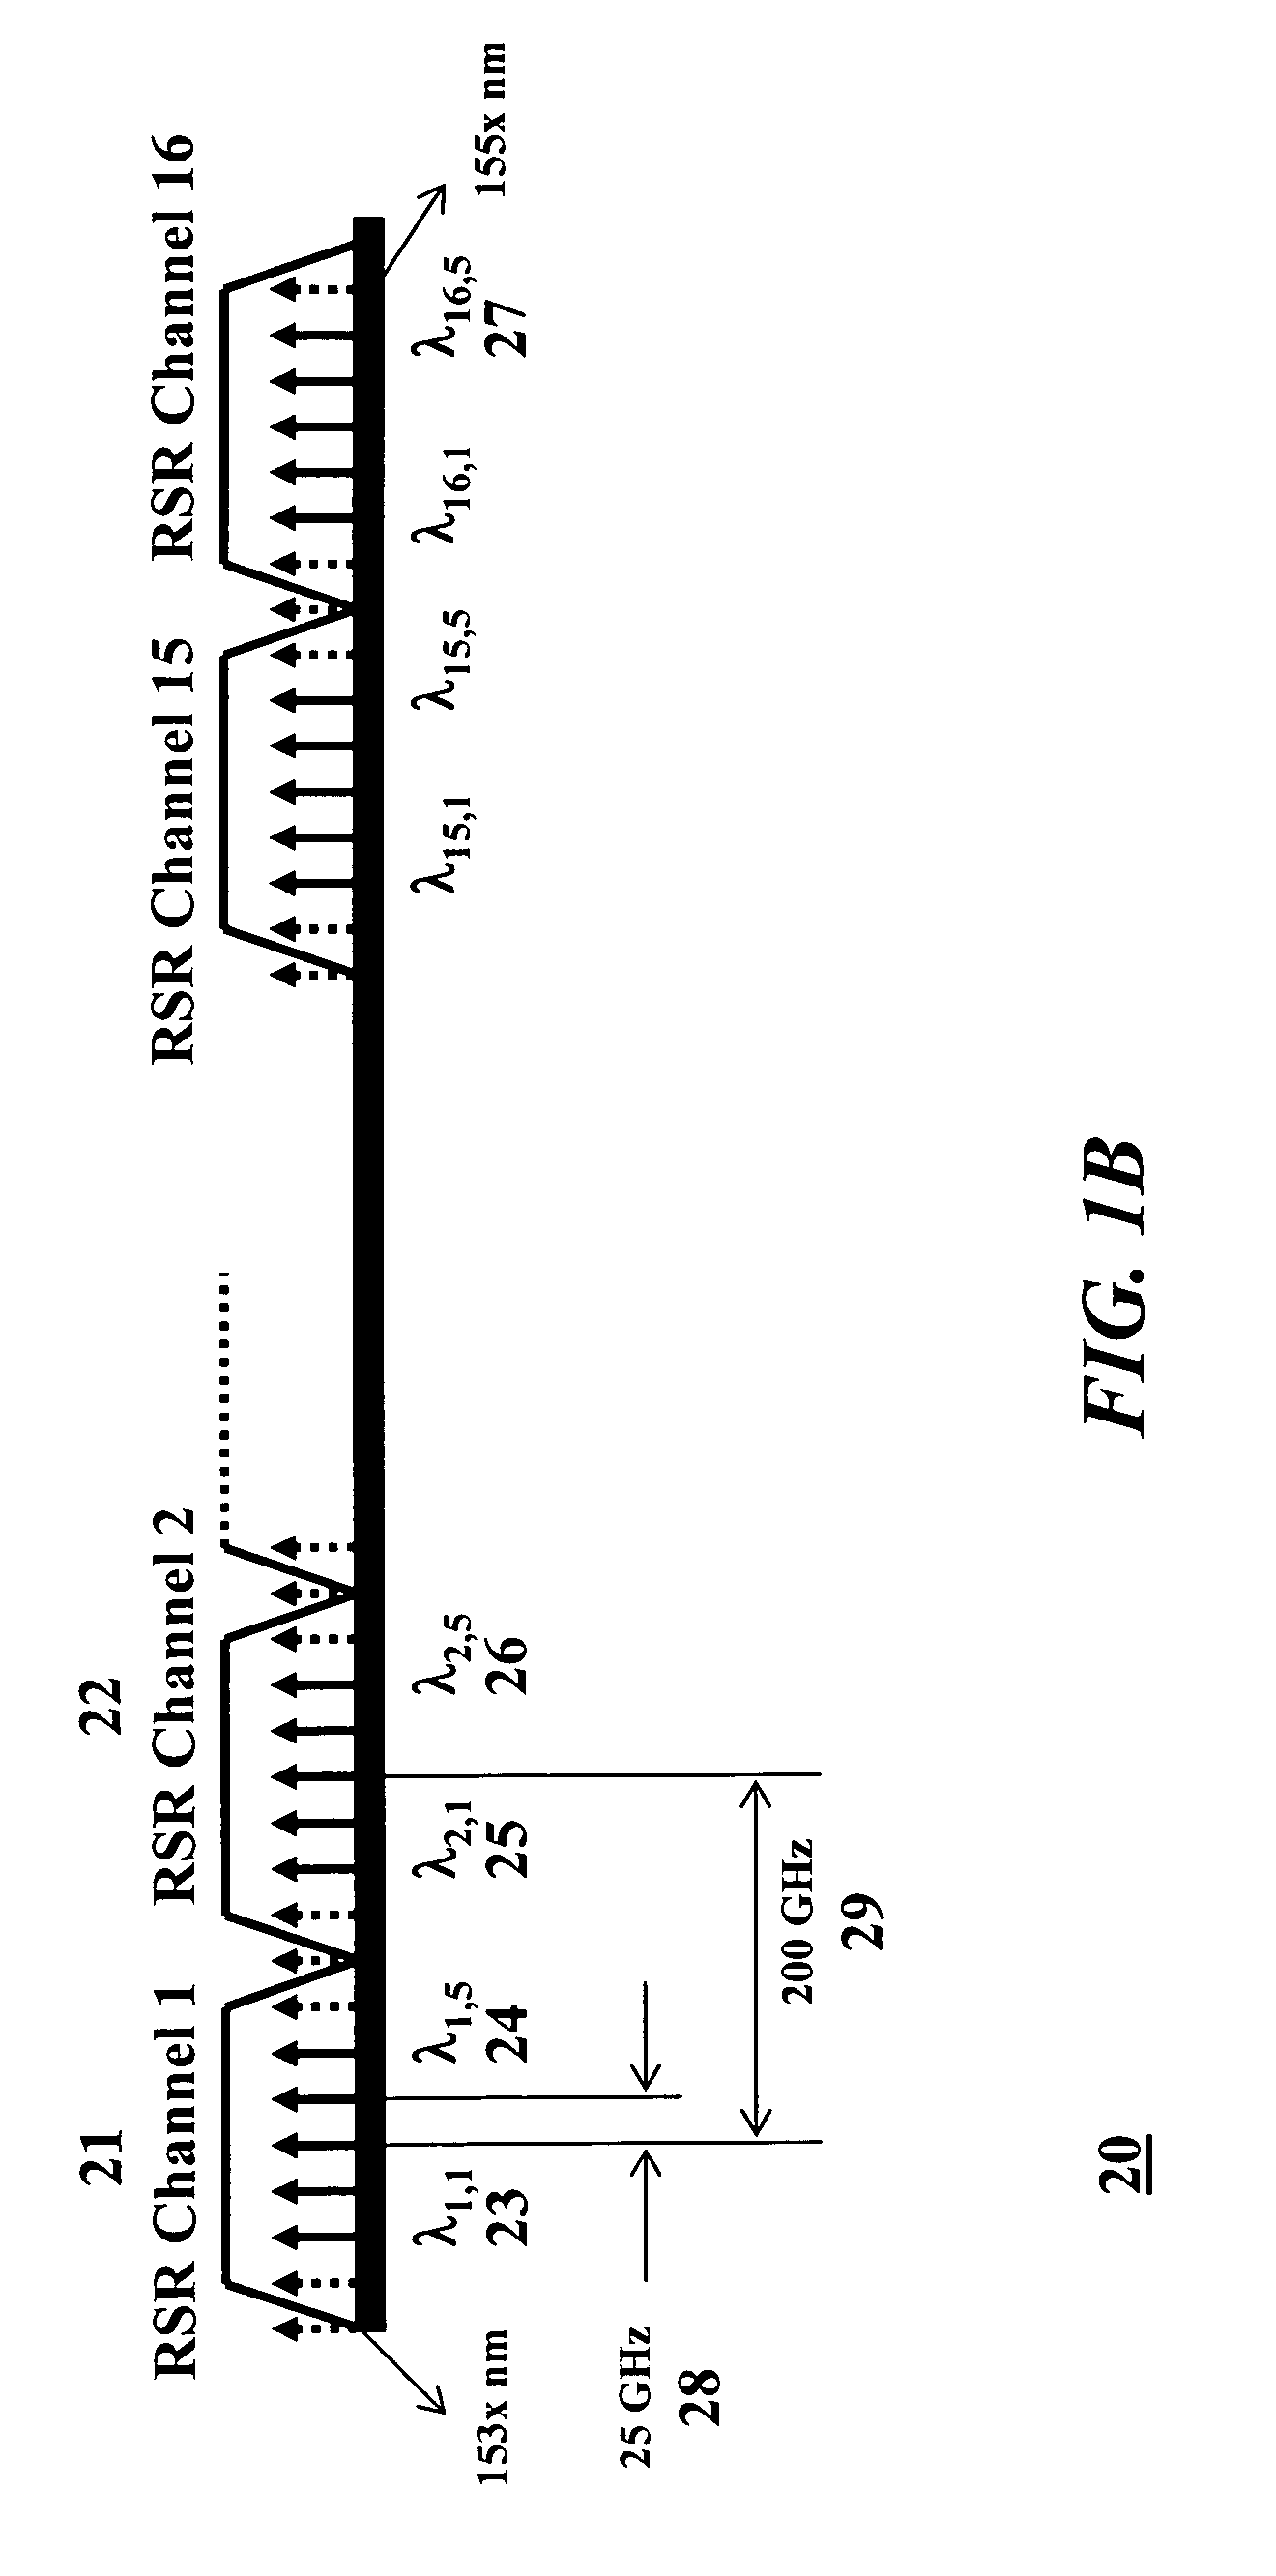 Reconfigurable service ring and method for operation in optical networks